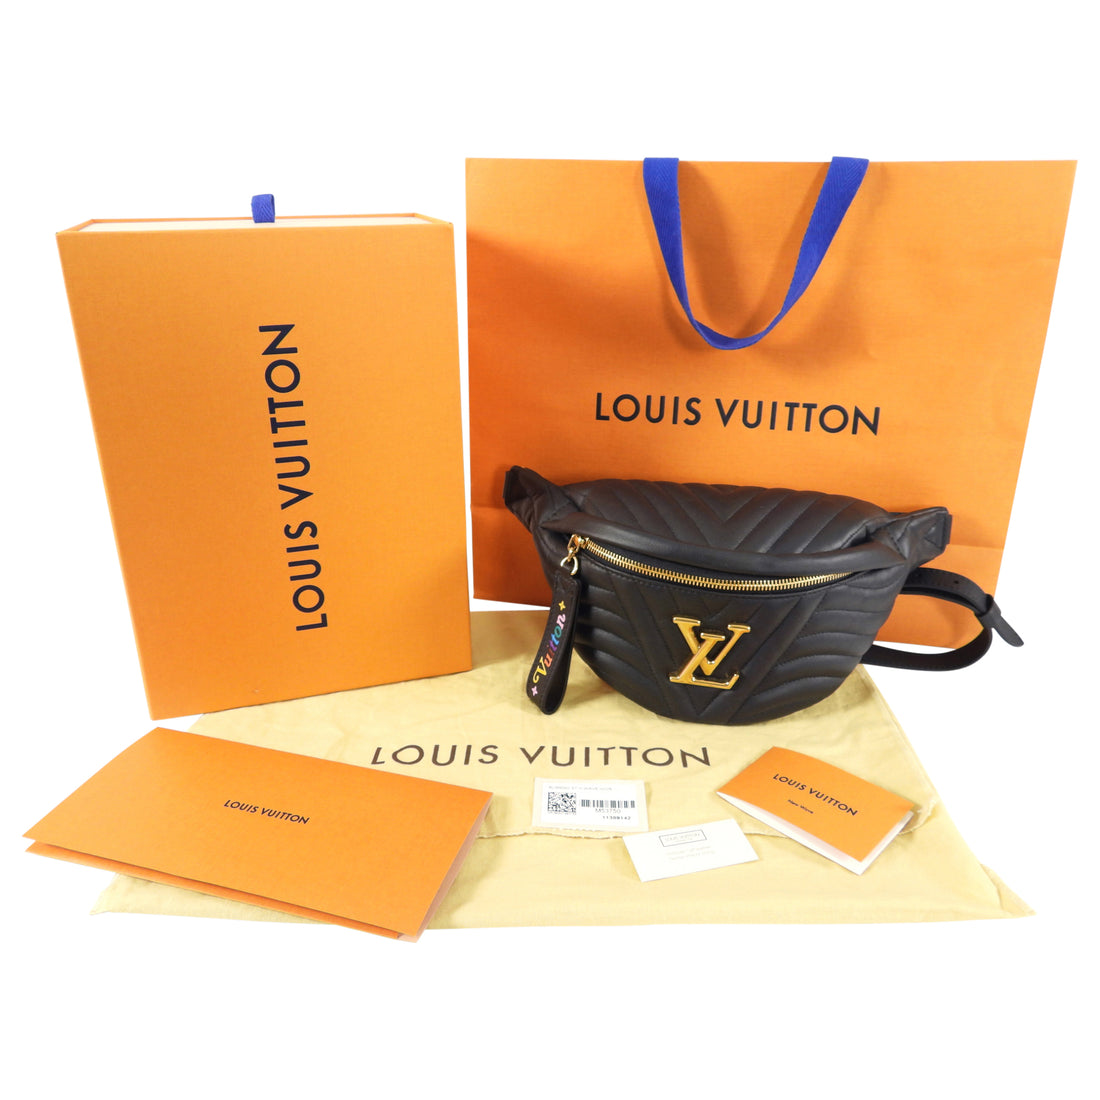 Louis Vuitton Black Leather Quilted LV Logo New Wave Bum Bag 